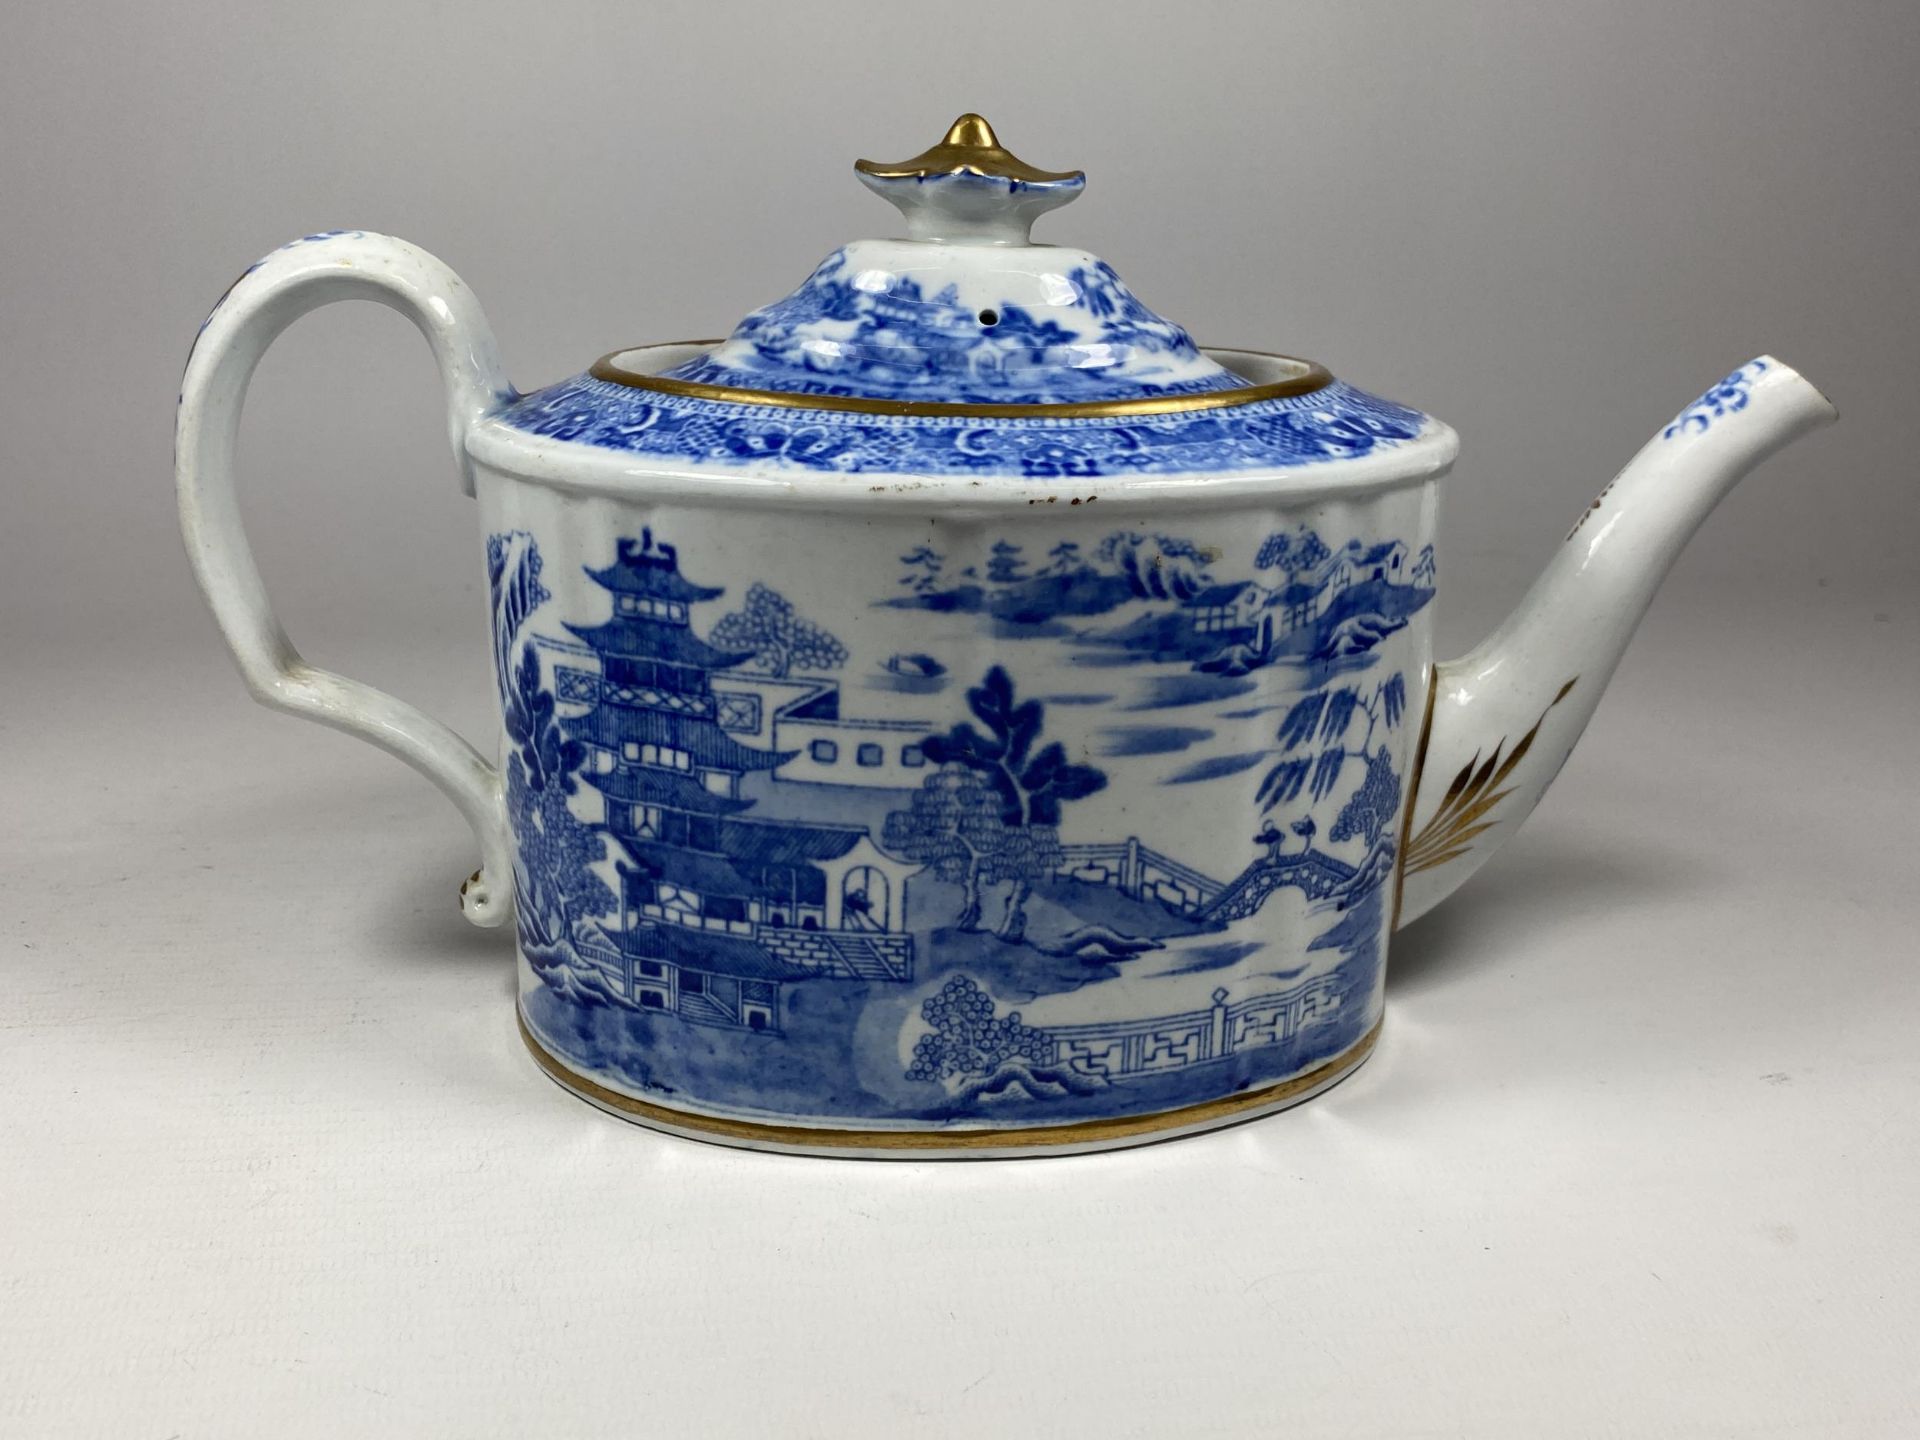 A CHINESE QING BLUE & WHITE EXPORT PORCELAIN TEAPOT WITH PAGODA DESIGN, HEIGHT 15CM